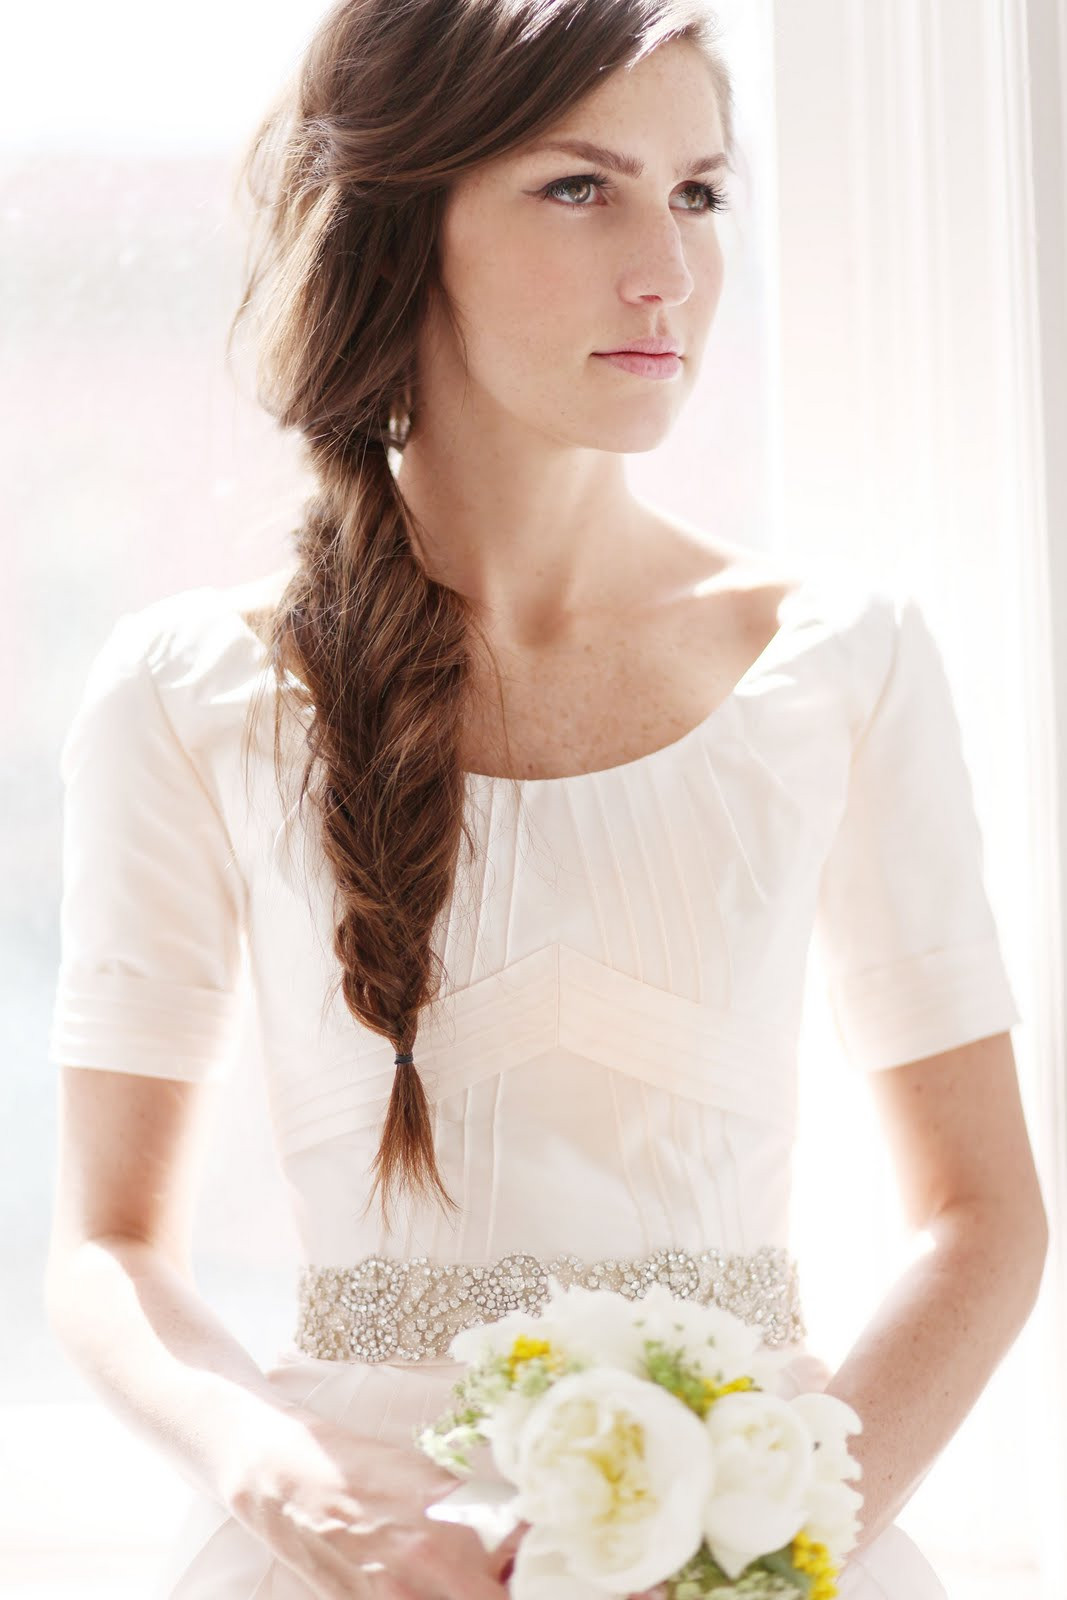 Wedding Hairstyles Long Straight Hair
 20 Wedding Hairstyle Long Hair You Can Do At Home MagMent